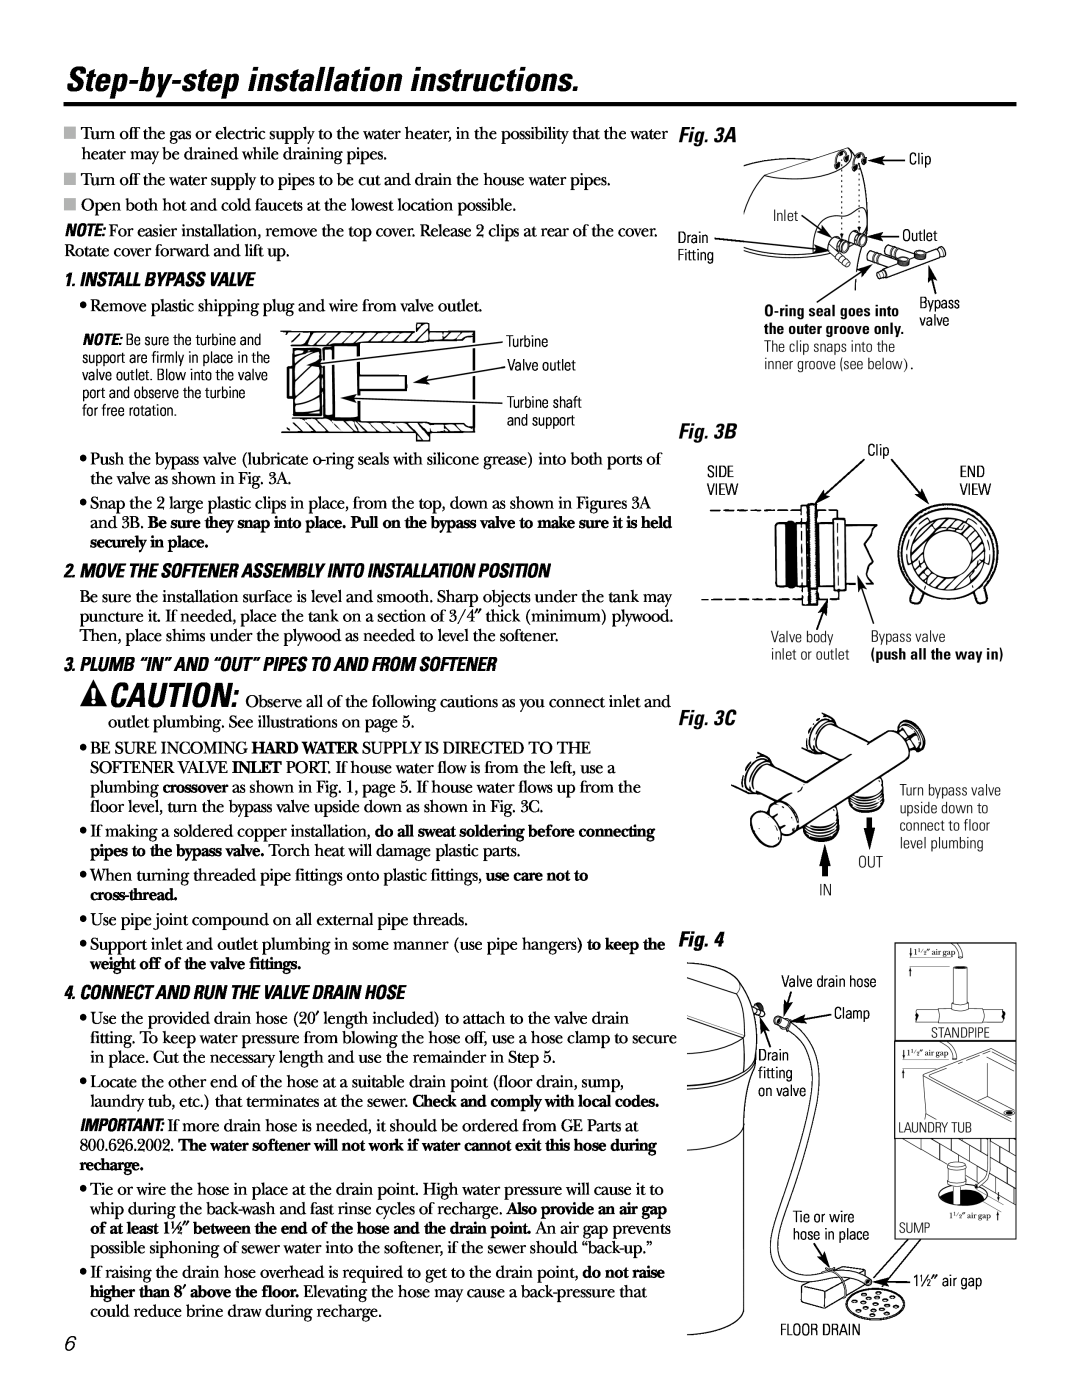 GE GXSF31E Step-by-step installation instructions, Install Bypass Valve, Plumb “In” And “Out” Pipes To And From Softener 